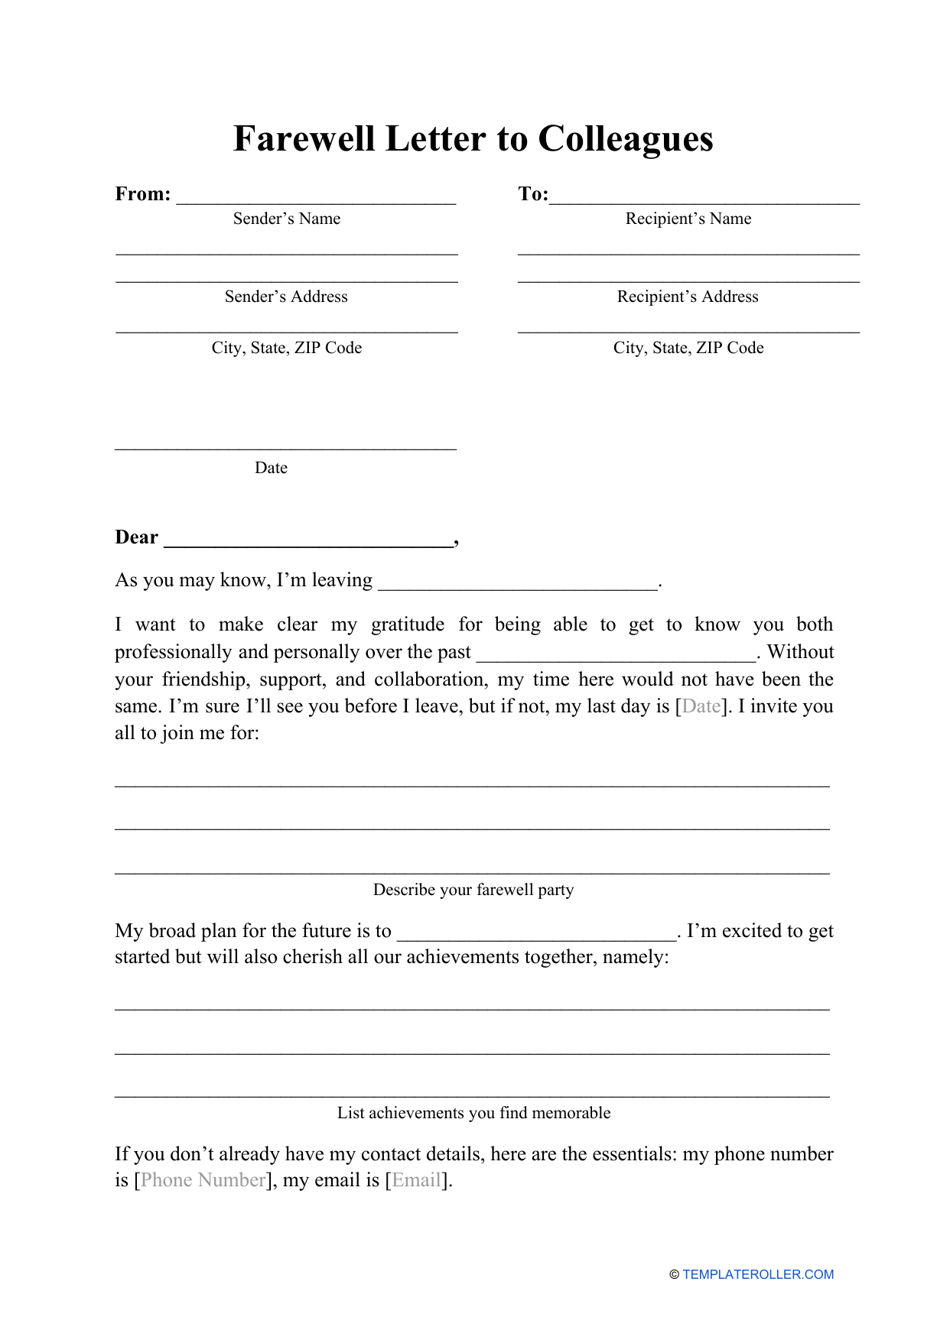 Farewell Letter to Colleagues - Sample Template